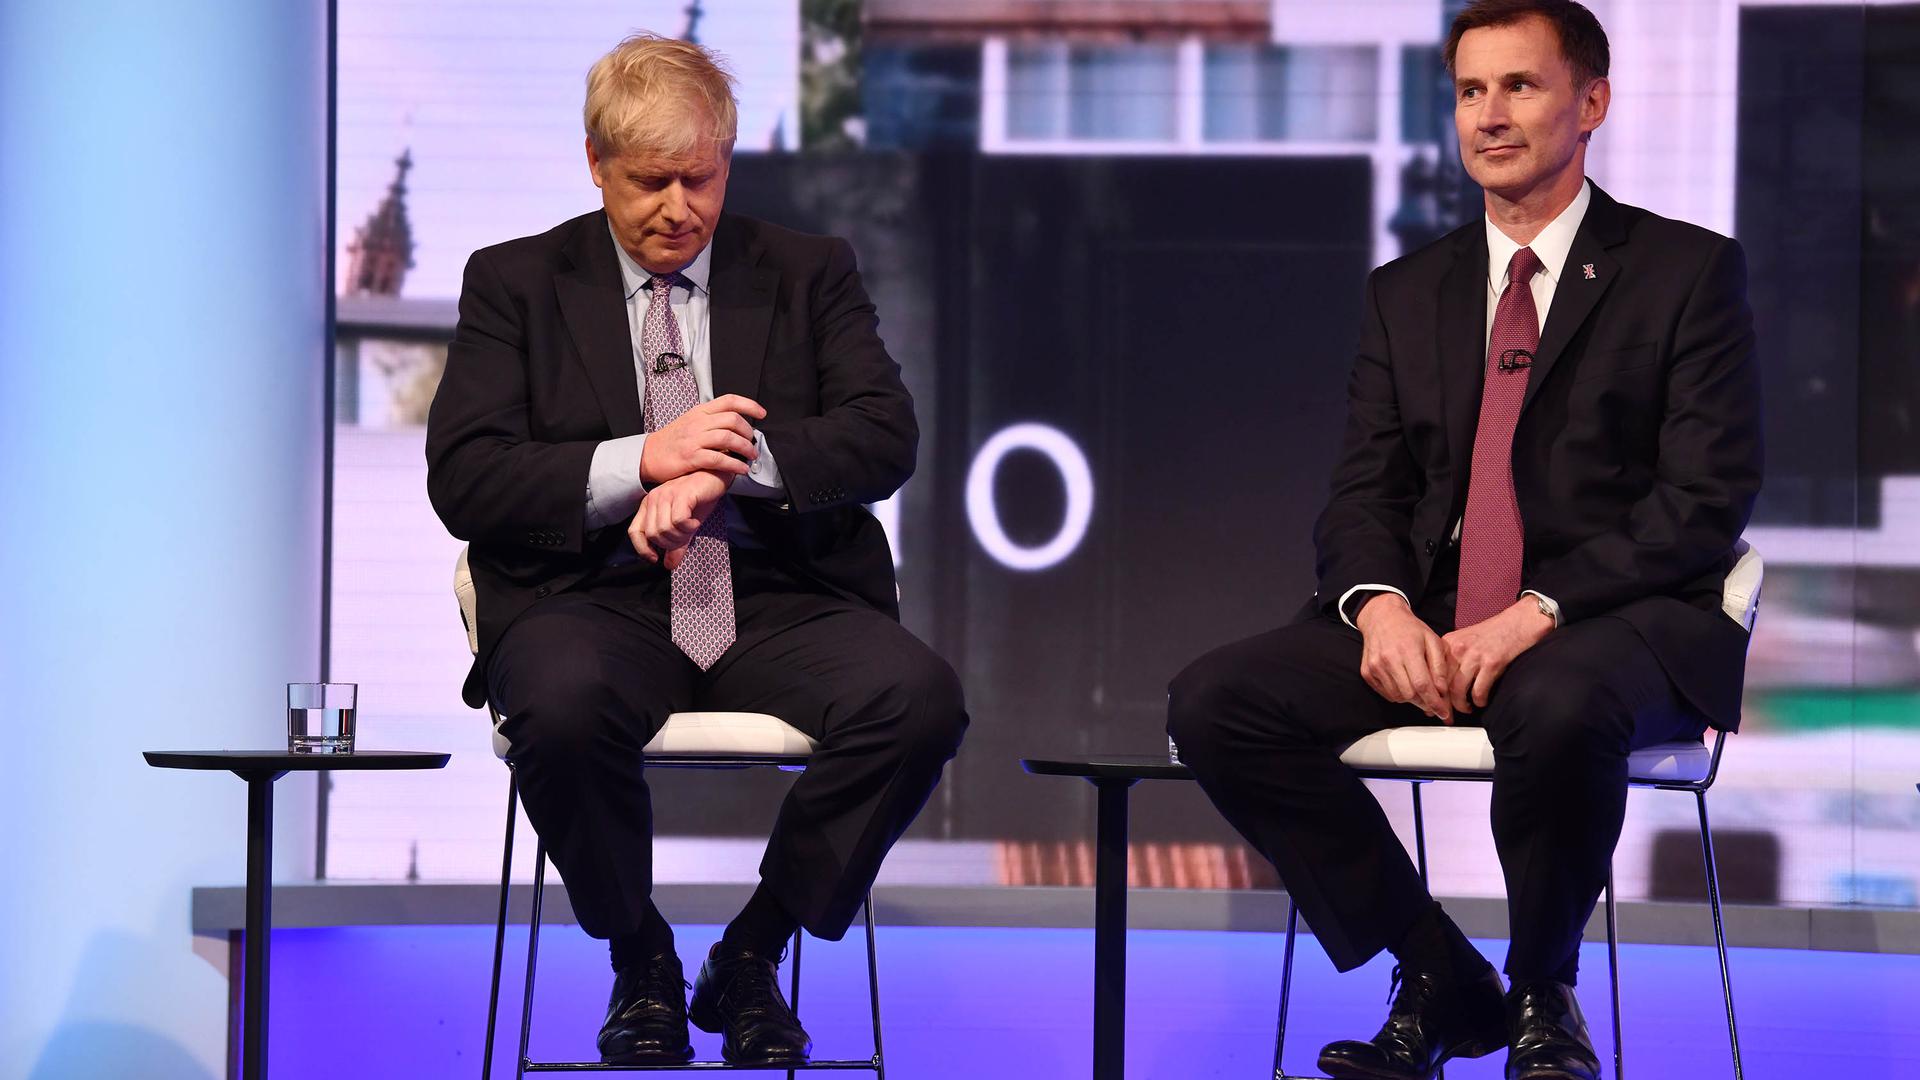 In a handout picture released by the British Broadcasting Corperation (BBC) on June 18, 2019 Conservative Party leadership contender Conservative MP Boris Johnson (L) checks his watch seated next to Britain's Foreign Secretary Jeremy Hunt (R) during a BBC television leadership debate in London on June 18, 2019. - The UK leadership race narrowed to five in a second vote by MPs on June 18 with the remaining contenders taking part in a televised debate organised by the BBC. (Photo by JEFF OVERS / BBC / AFP) / RESTRICTED TO EDITORIAL USE - MANDATORY CREDIT " AFP PHOTO / JEFF OVERS-BBC " - NO MARKETING NO ADVERTISING CAMPAIGNS - DISTRIBUTED AS A SERVICE TO CLIENTS TO REPORT ON THE BBC PROGRAMME OR EVENT SPECIFIED IN THE CAPTION - NO ARCHIVE - NO USE AFTER  JULY 9, 2019 / 